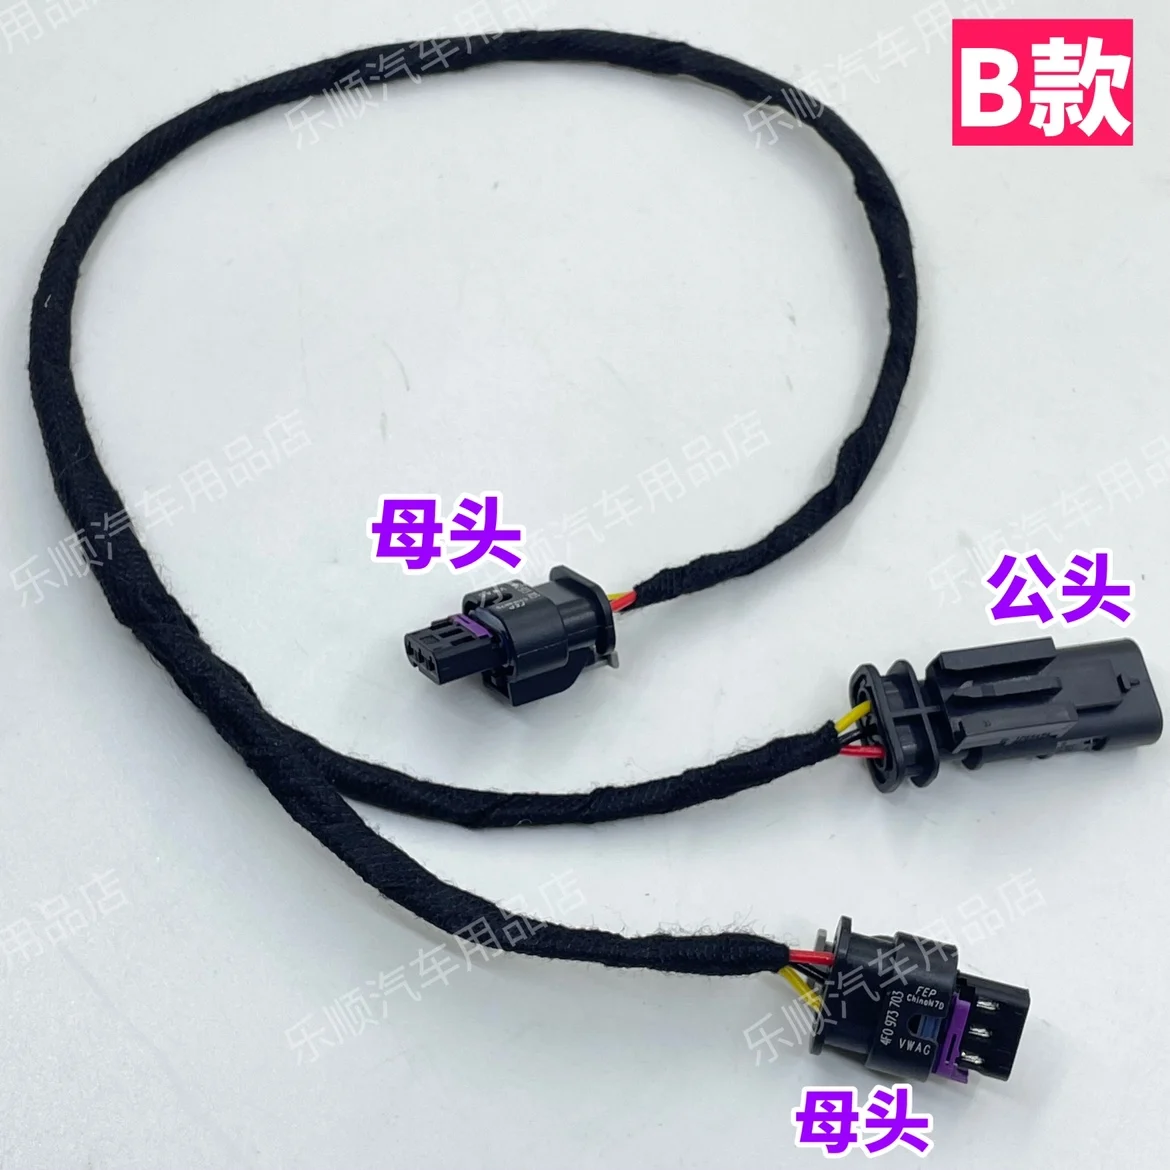 

Suitable for Benz G500/G63 exhaust motor extension harness Scorpio exhaust AK exhaust motor extension cable